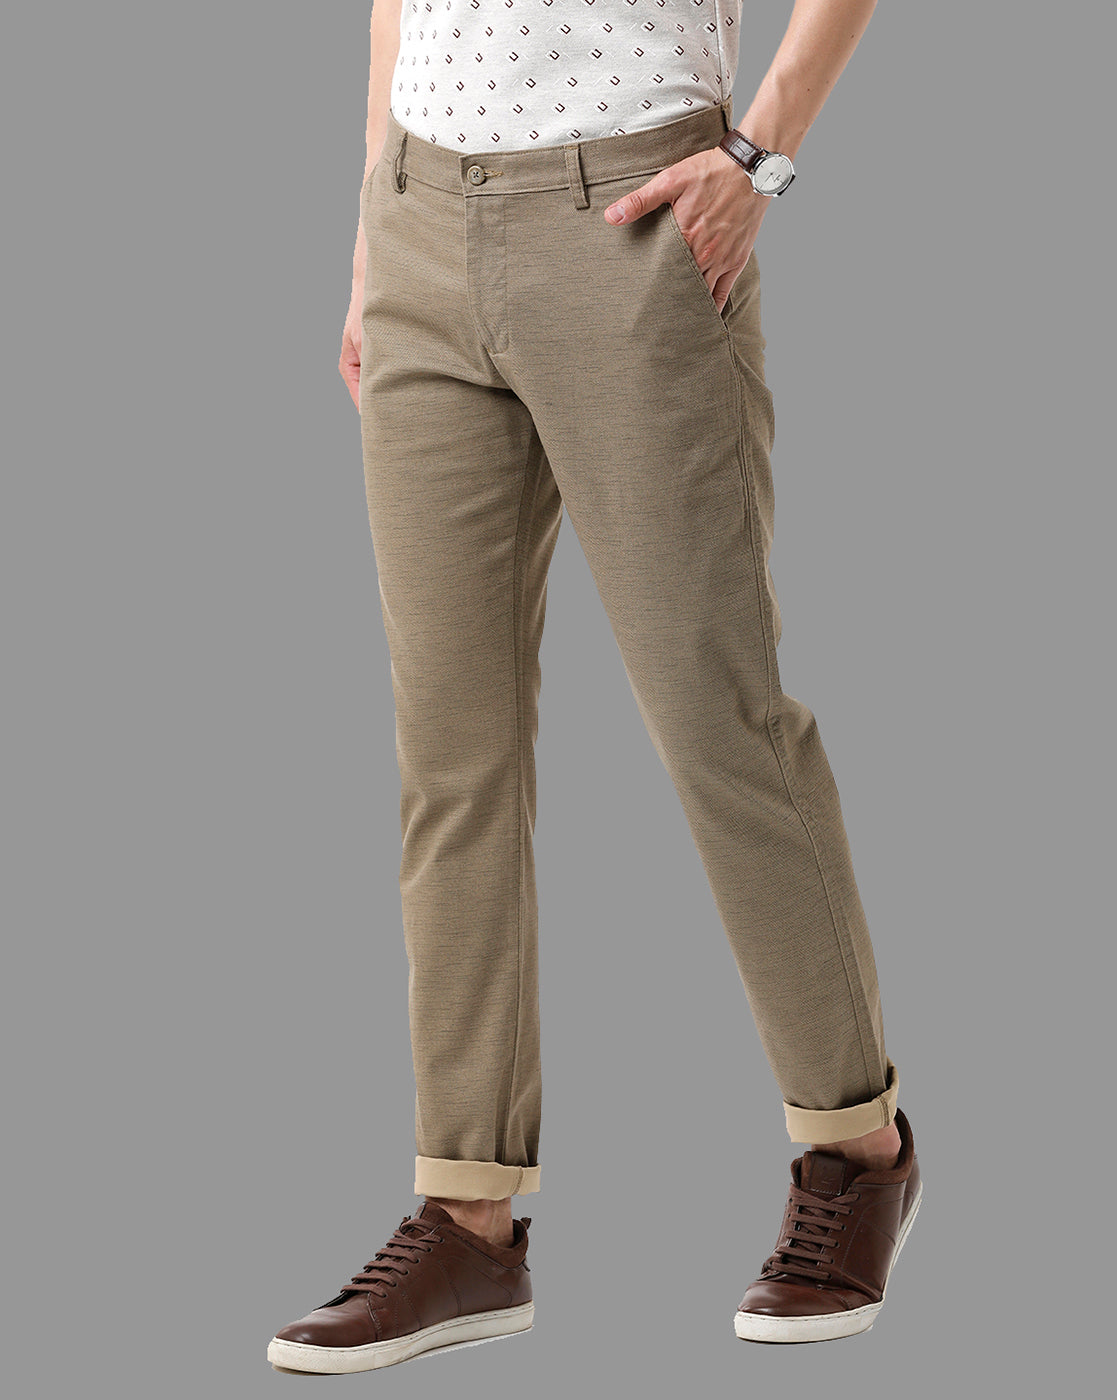 Shop Gant Men Green Solid Slim Fit Trouser | ICONIC INDIA – Iconic India